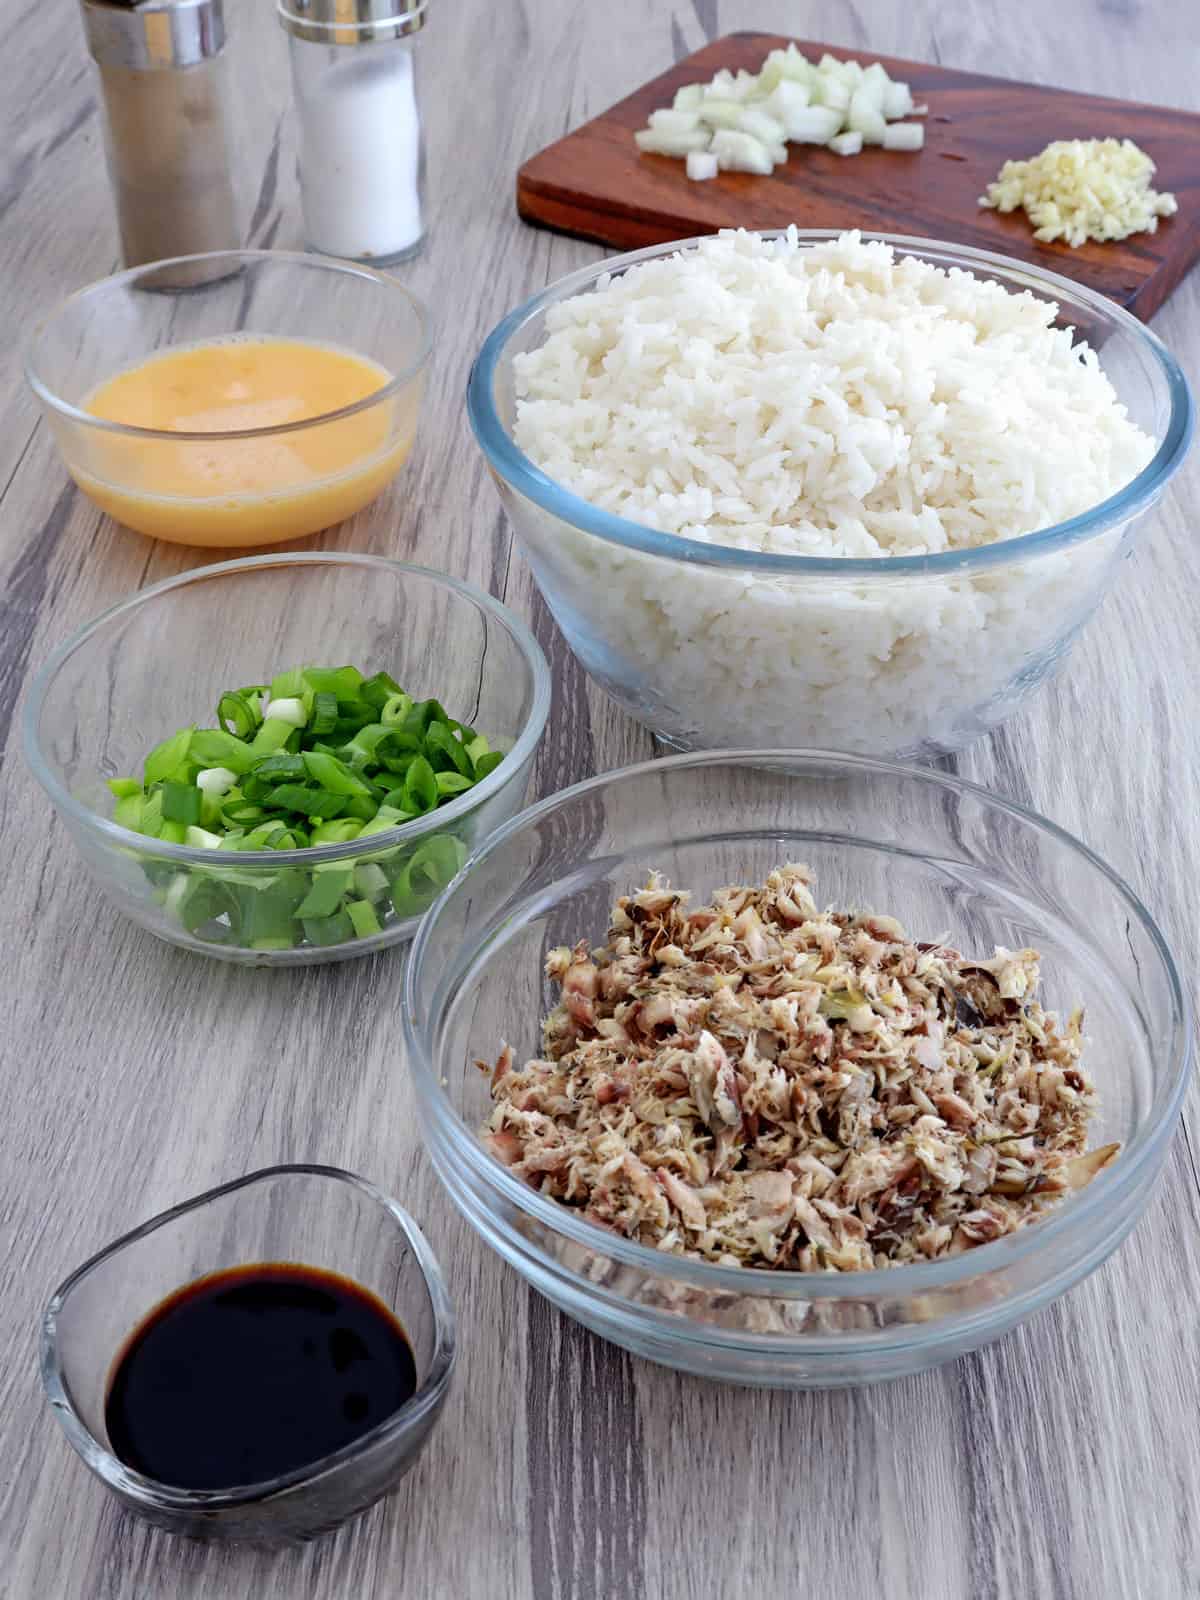 steamed rice, tinapa flakes, green onions, beaten eggs, soy sauce in individual bowls